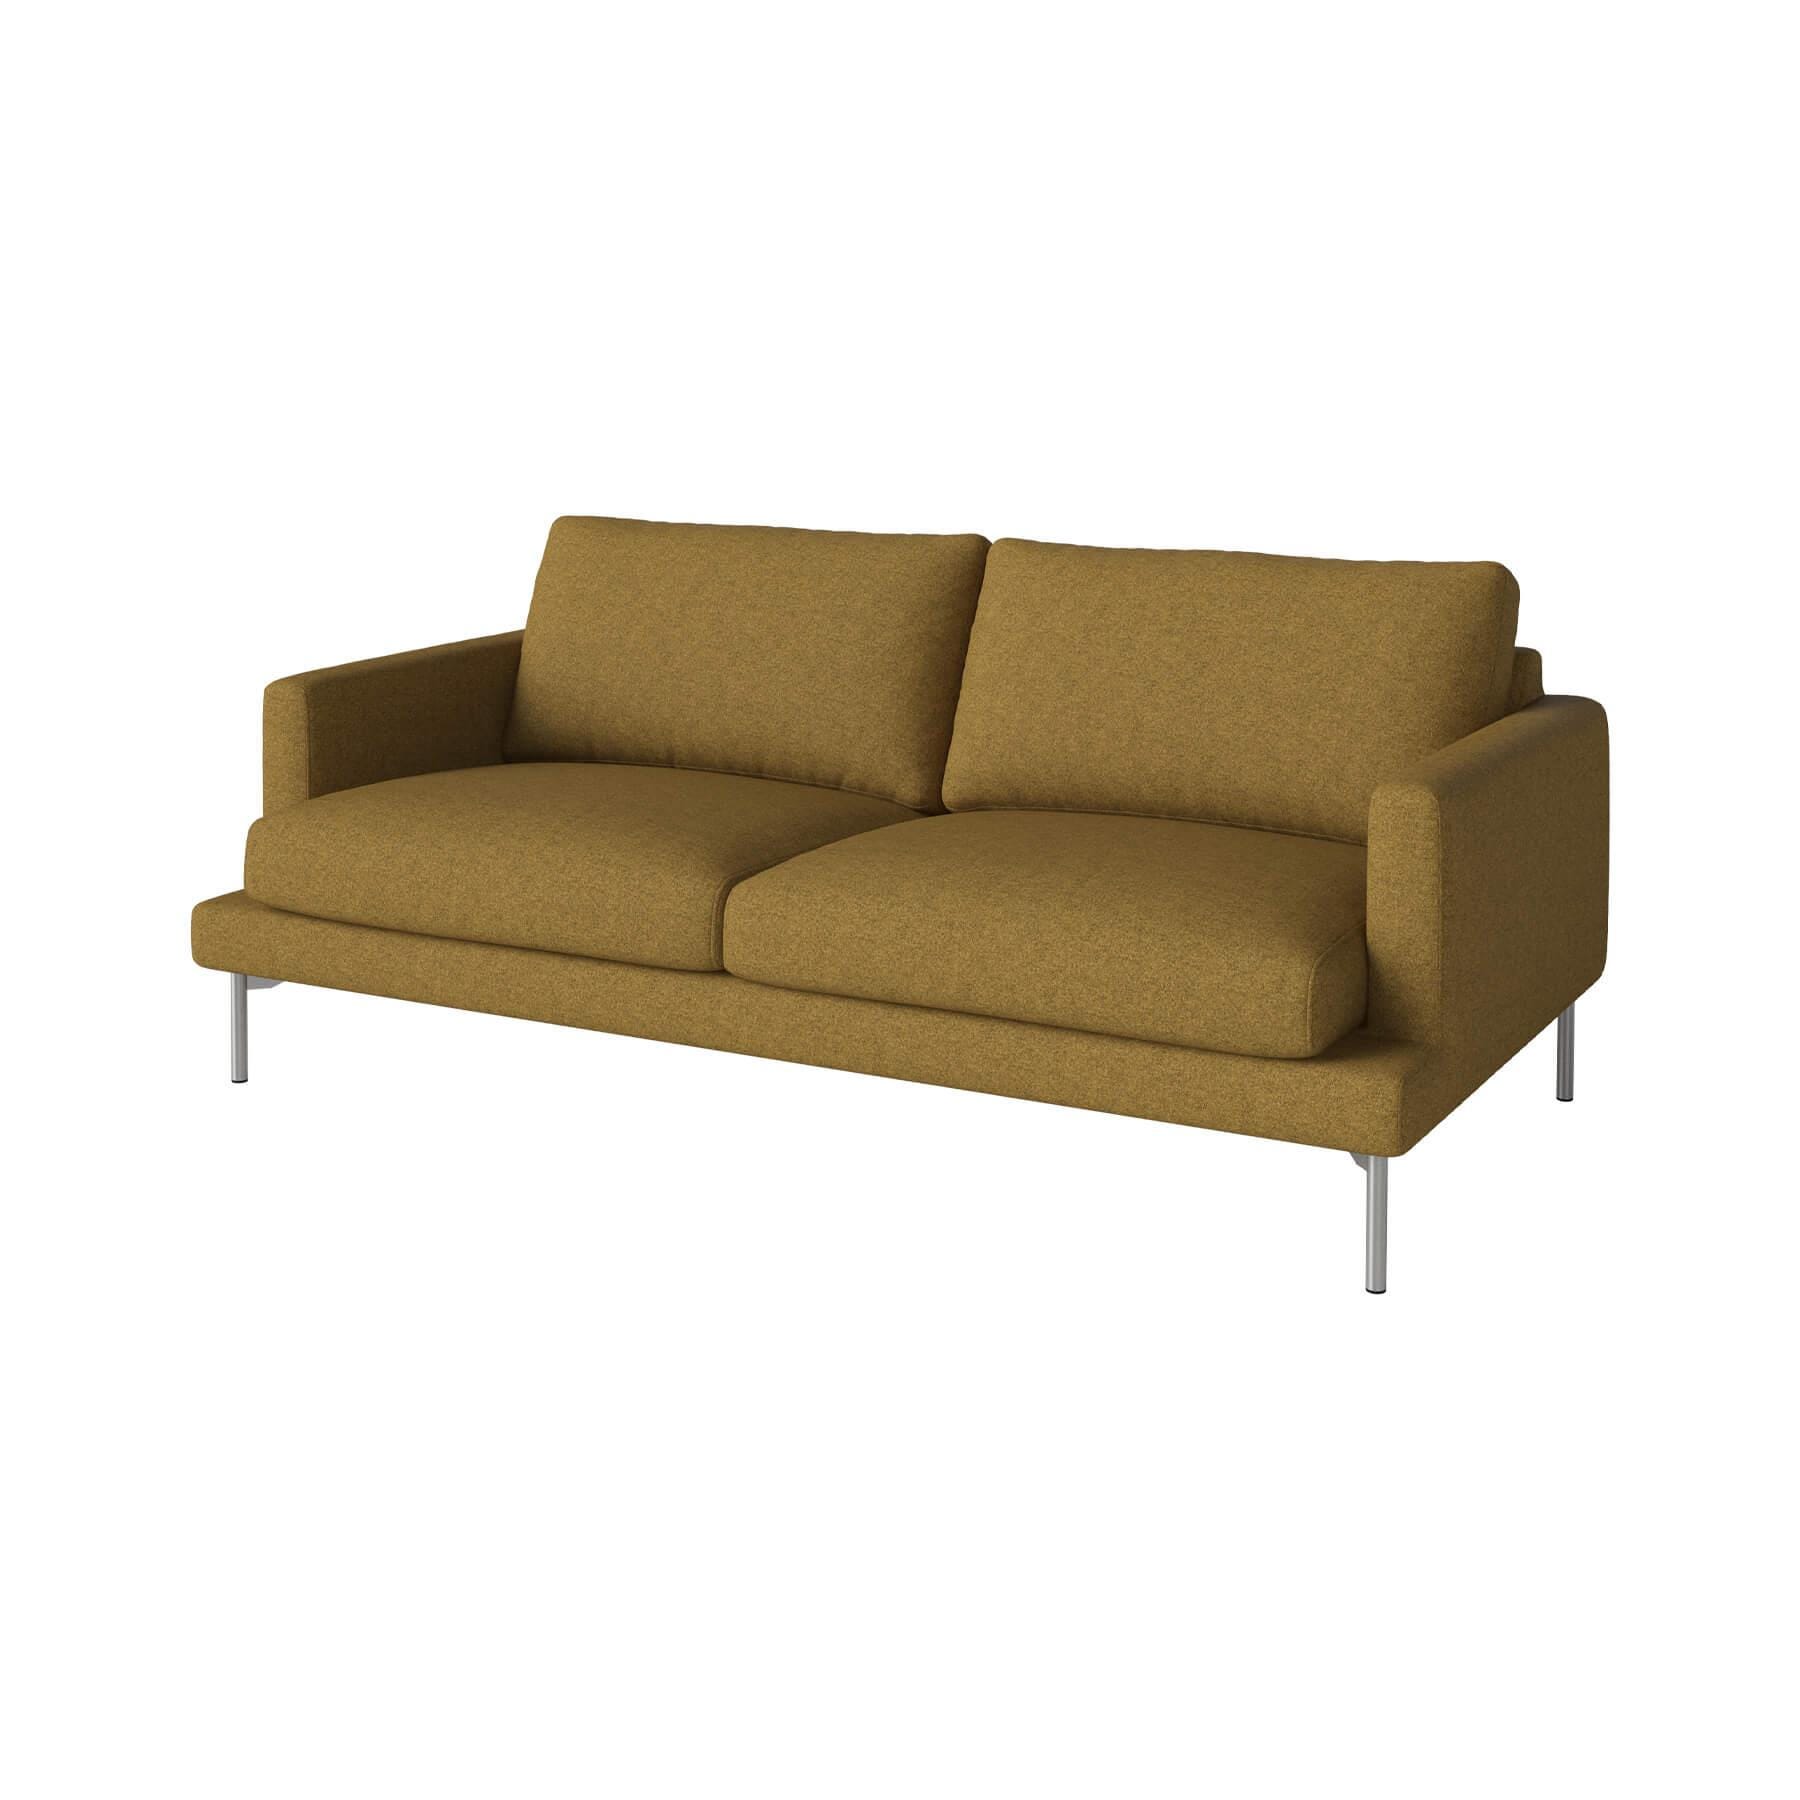 Bolia Veneda Sofa 25 Seater Sofa Brushed Steel Qual Curry Brown Designer Furniture From Holloways Of Ludlow